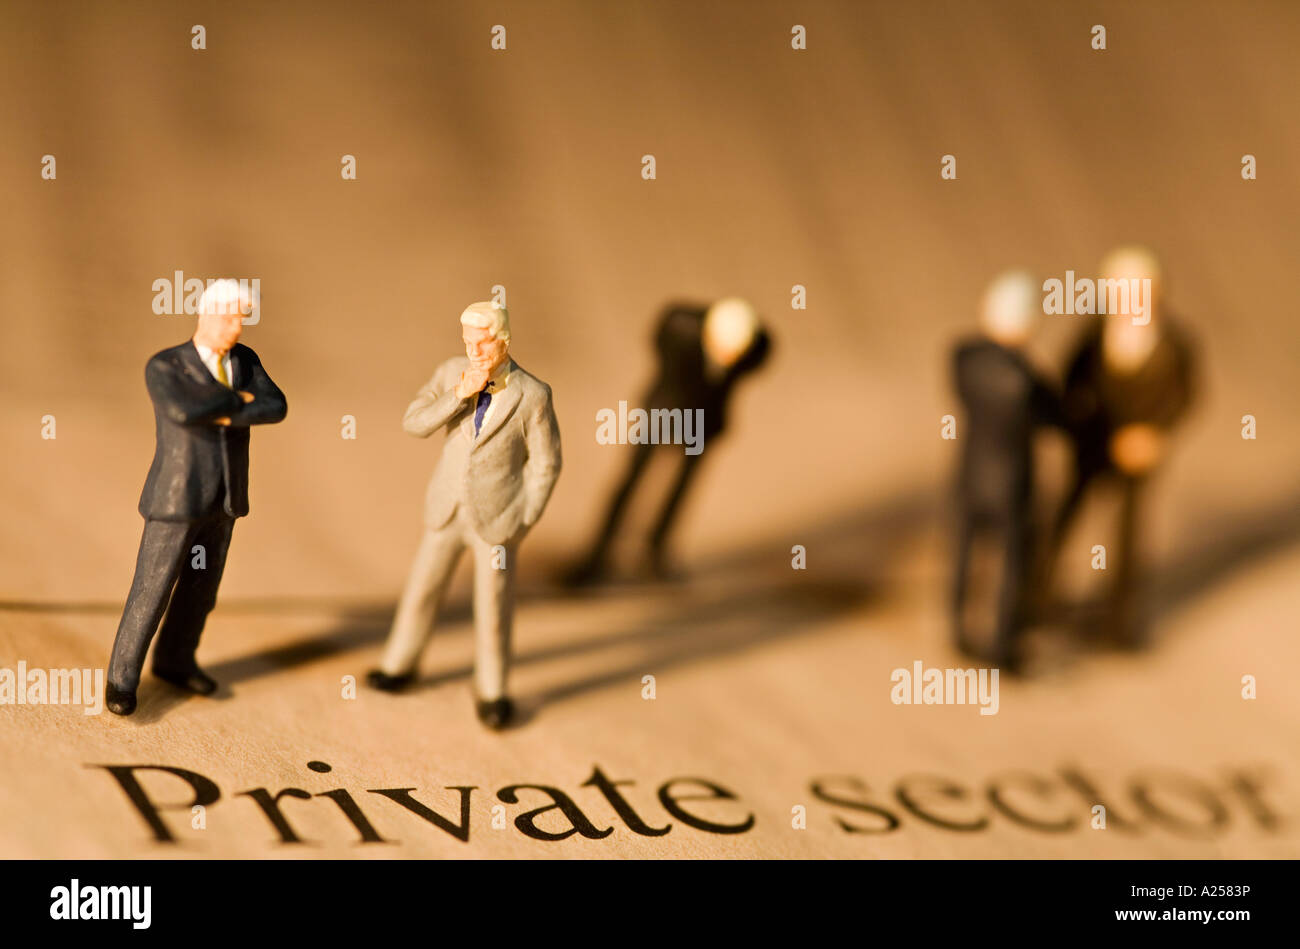 Miniature businessmen standing on financial newspaper in front private sector headline Stock Photo